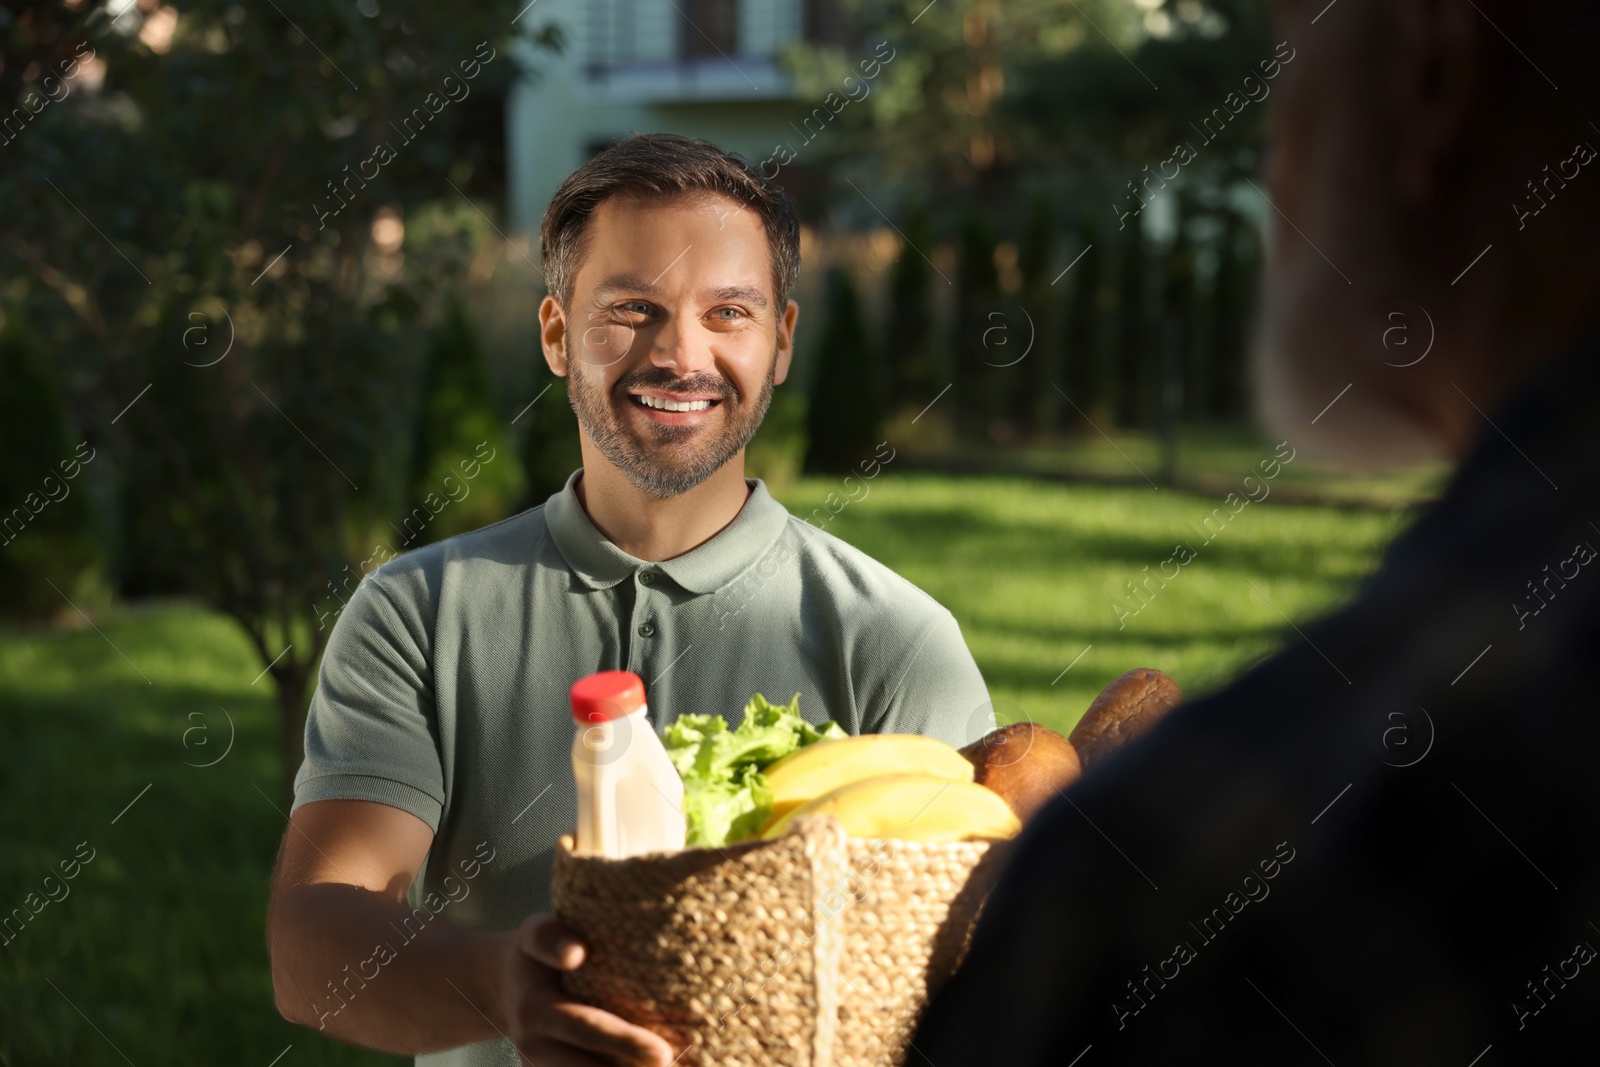 Photo of Man with wicker bag of products helping his senior neighbour outdoors